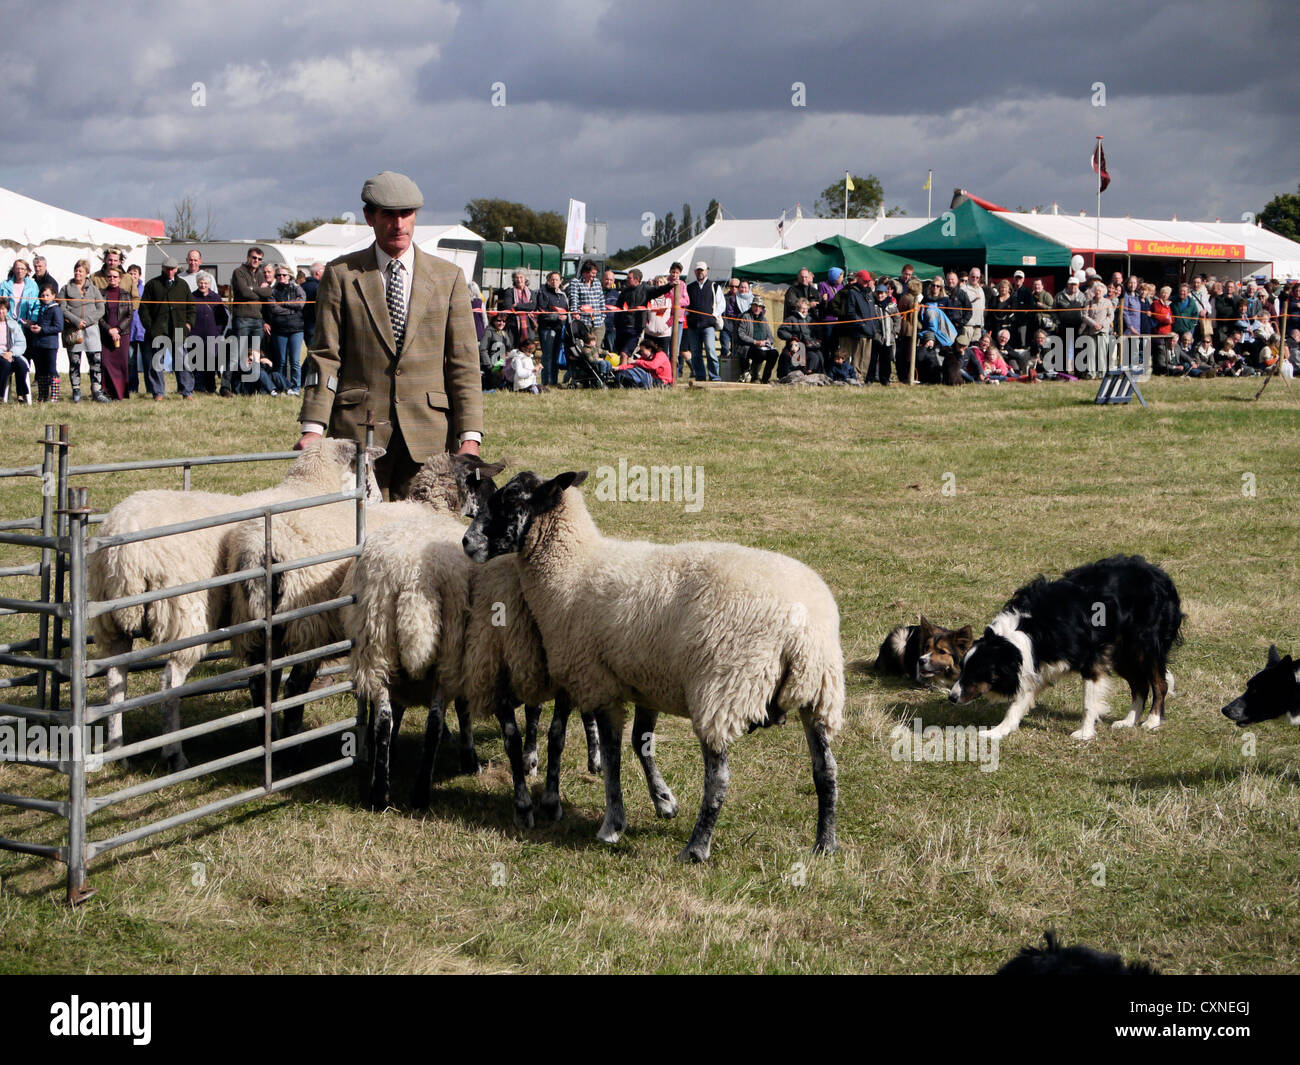 Sheep being penned in sheepdog demonstration at Gransden and District Agricultural Show Stock Photo